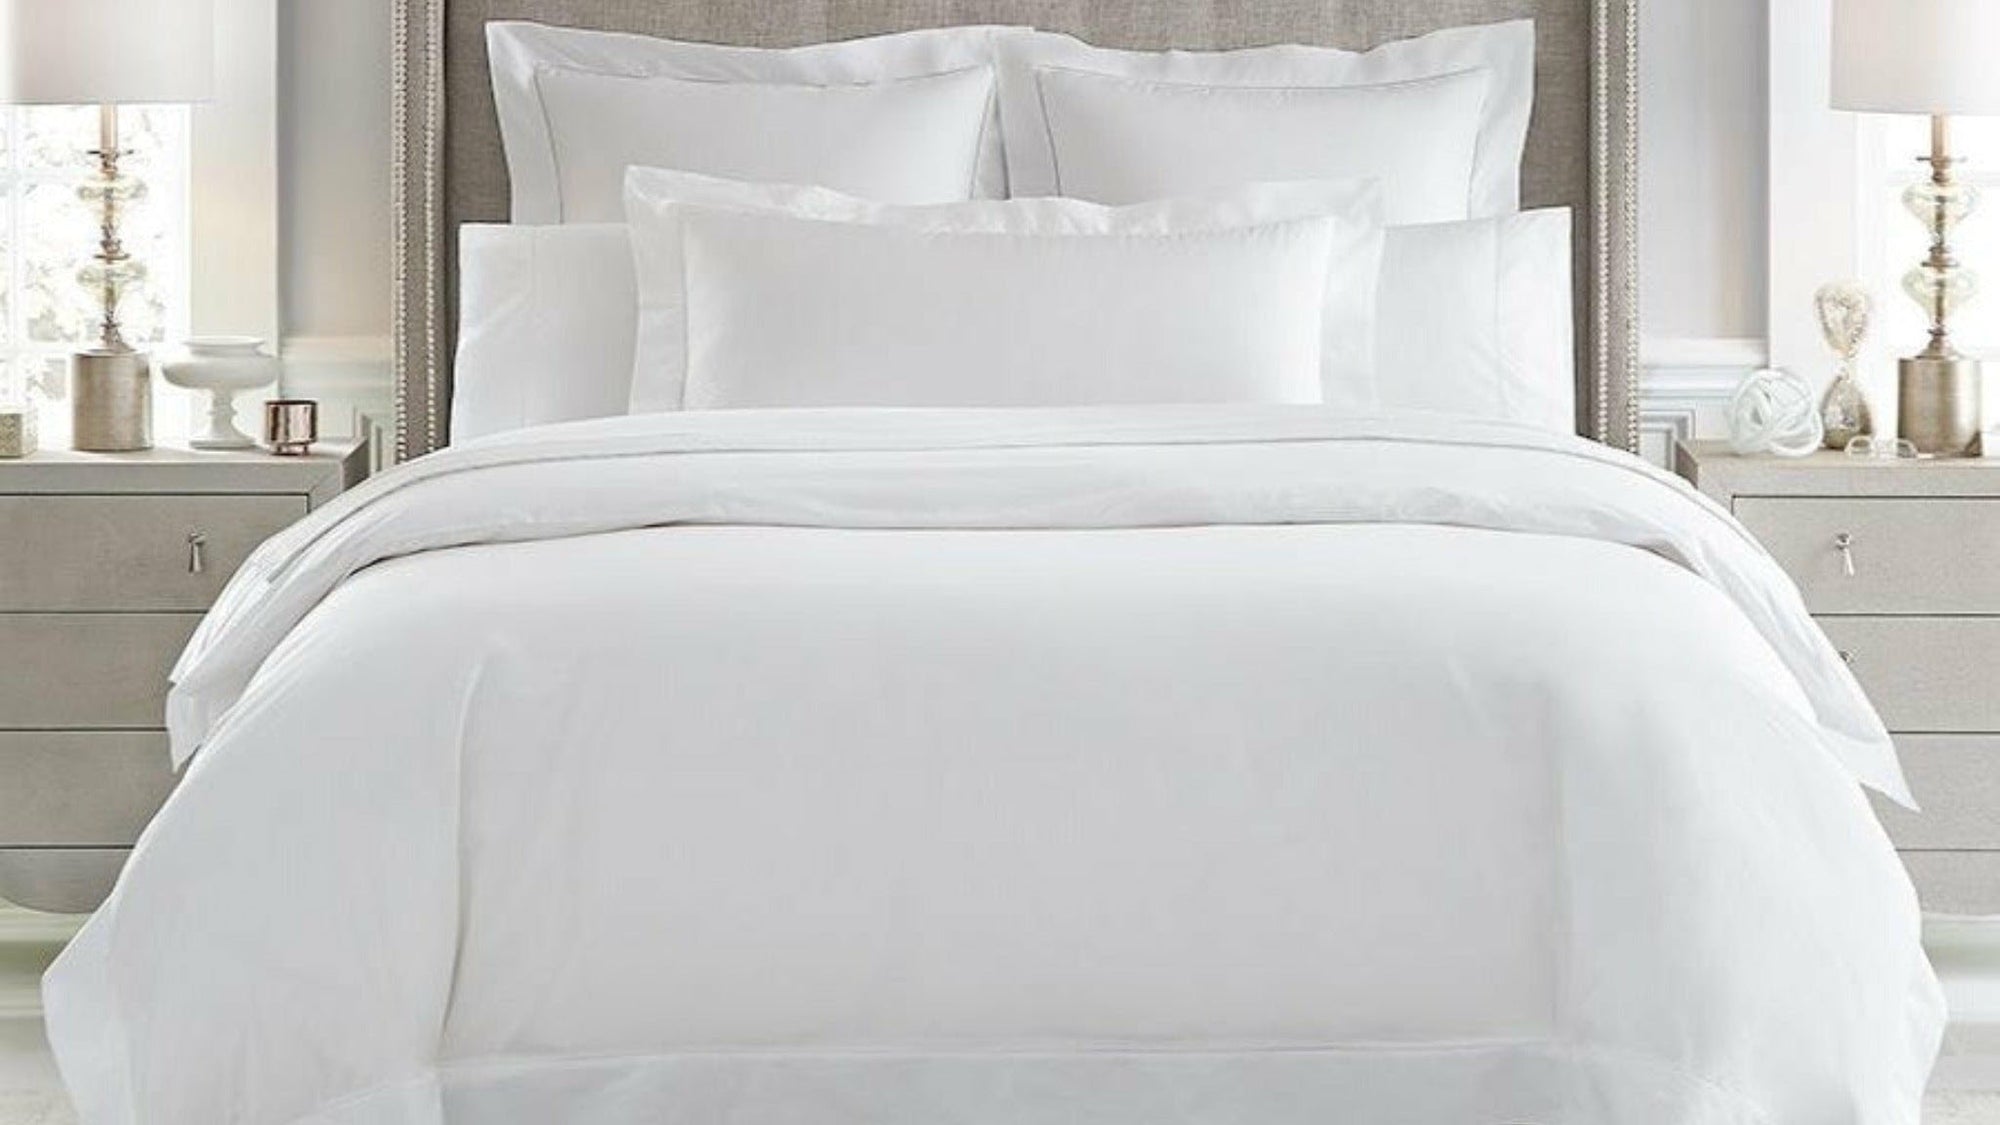 Tips for Keeping White Sheets White and Bright